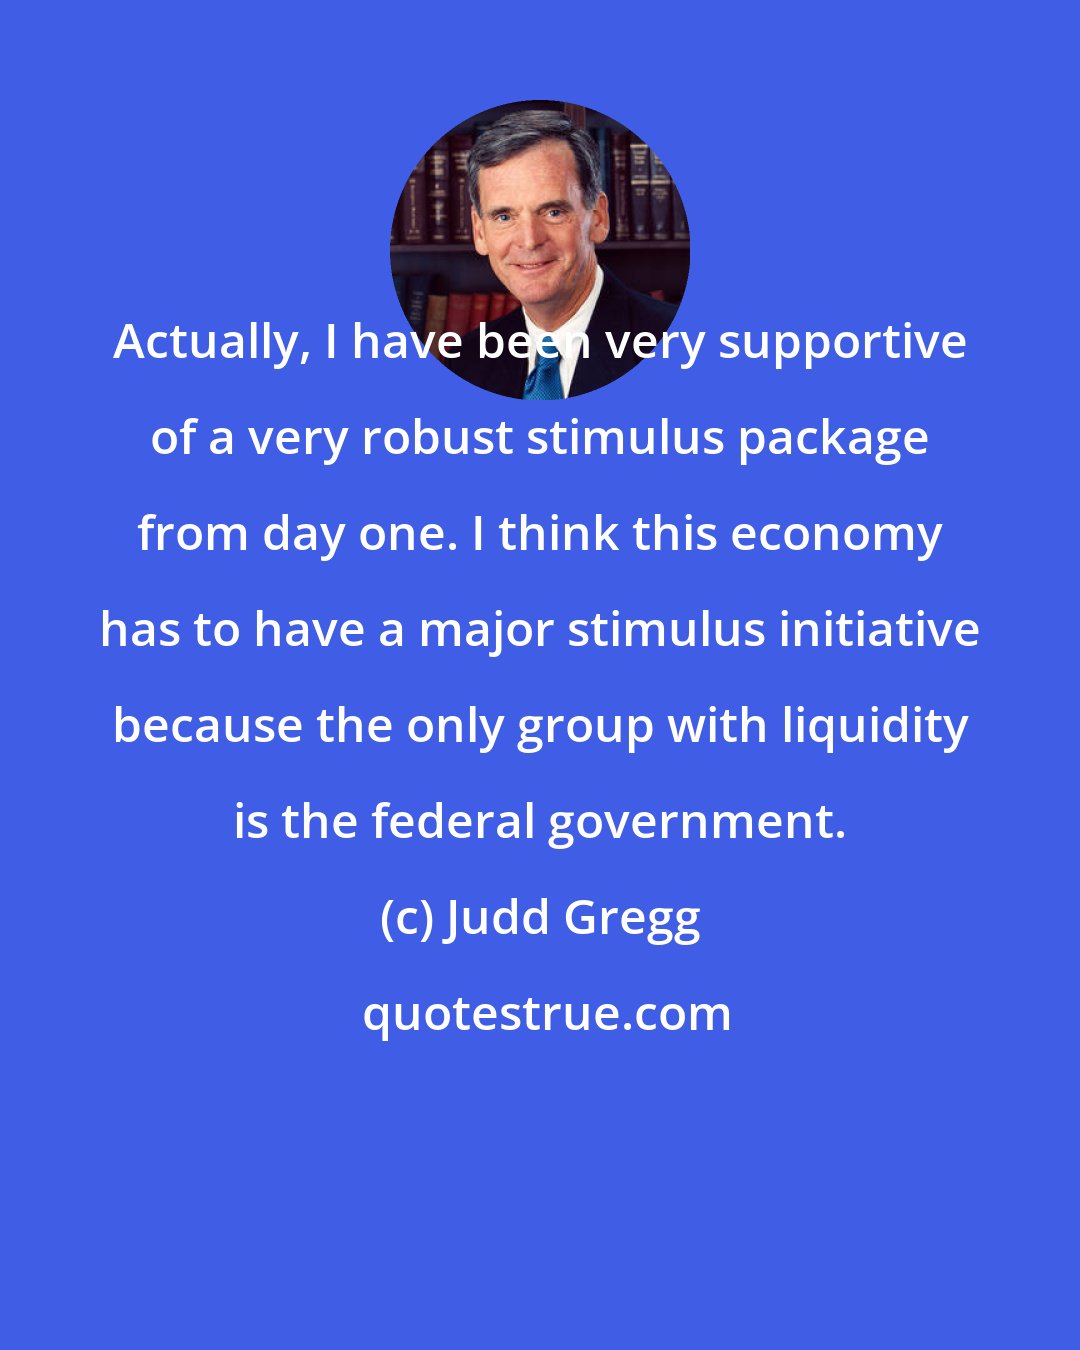 Judd Gregg: Actually, I have been very supportive of a very robust stimulus package from day one. I think this economy has to have a major stimulus initiative because the only group with liquidity is the federal government.